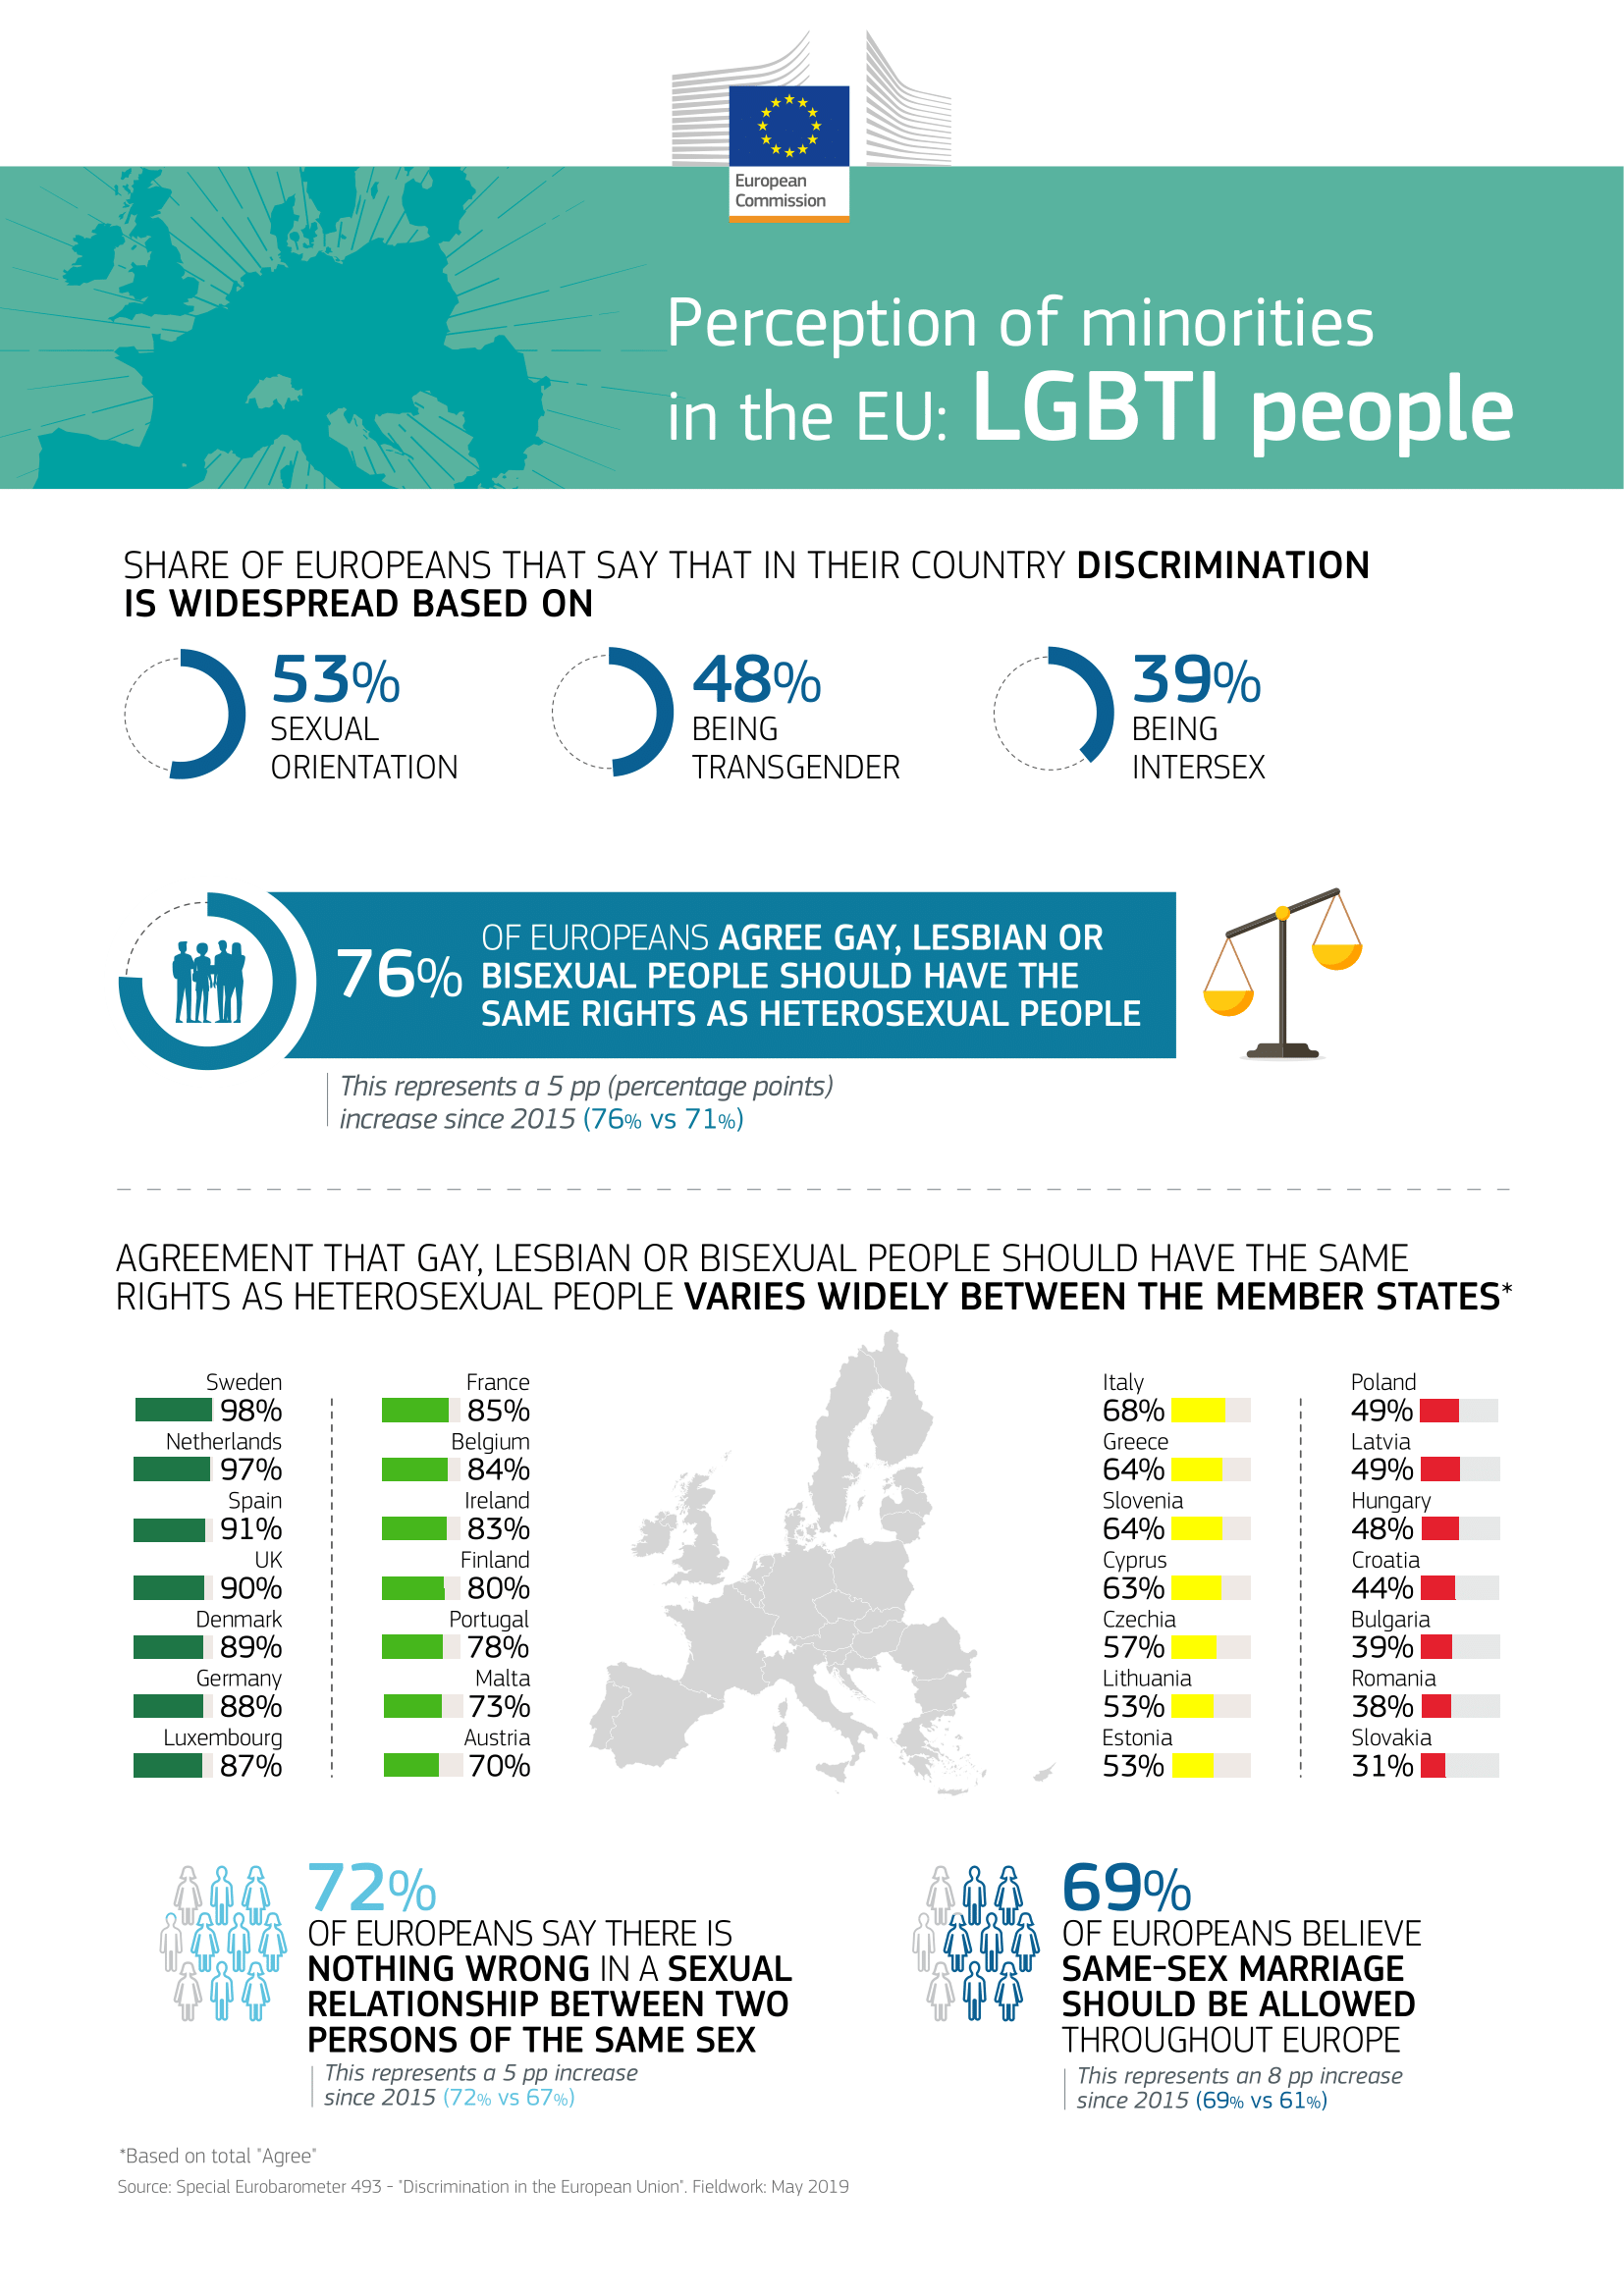 pedicab Underholdning disk European Commission 🇪🇺 on Twitter: "53% of Europeans say that in their  country, discrimination based on sexual orientation is widespread. More  from the Eurobarometer survey: https://t.co/vd3S1NnCfs #EU4LGBTI  https://t.co/eSF0pOesX2" / Twitter